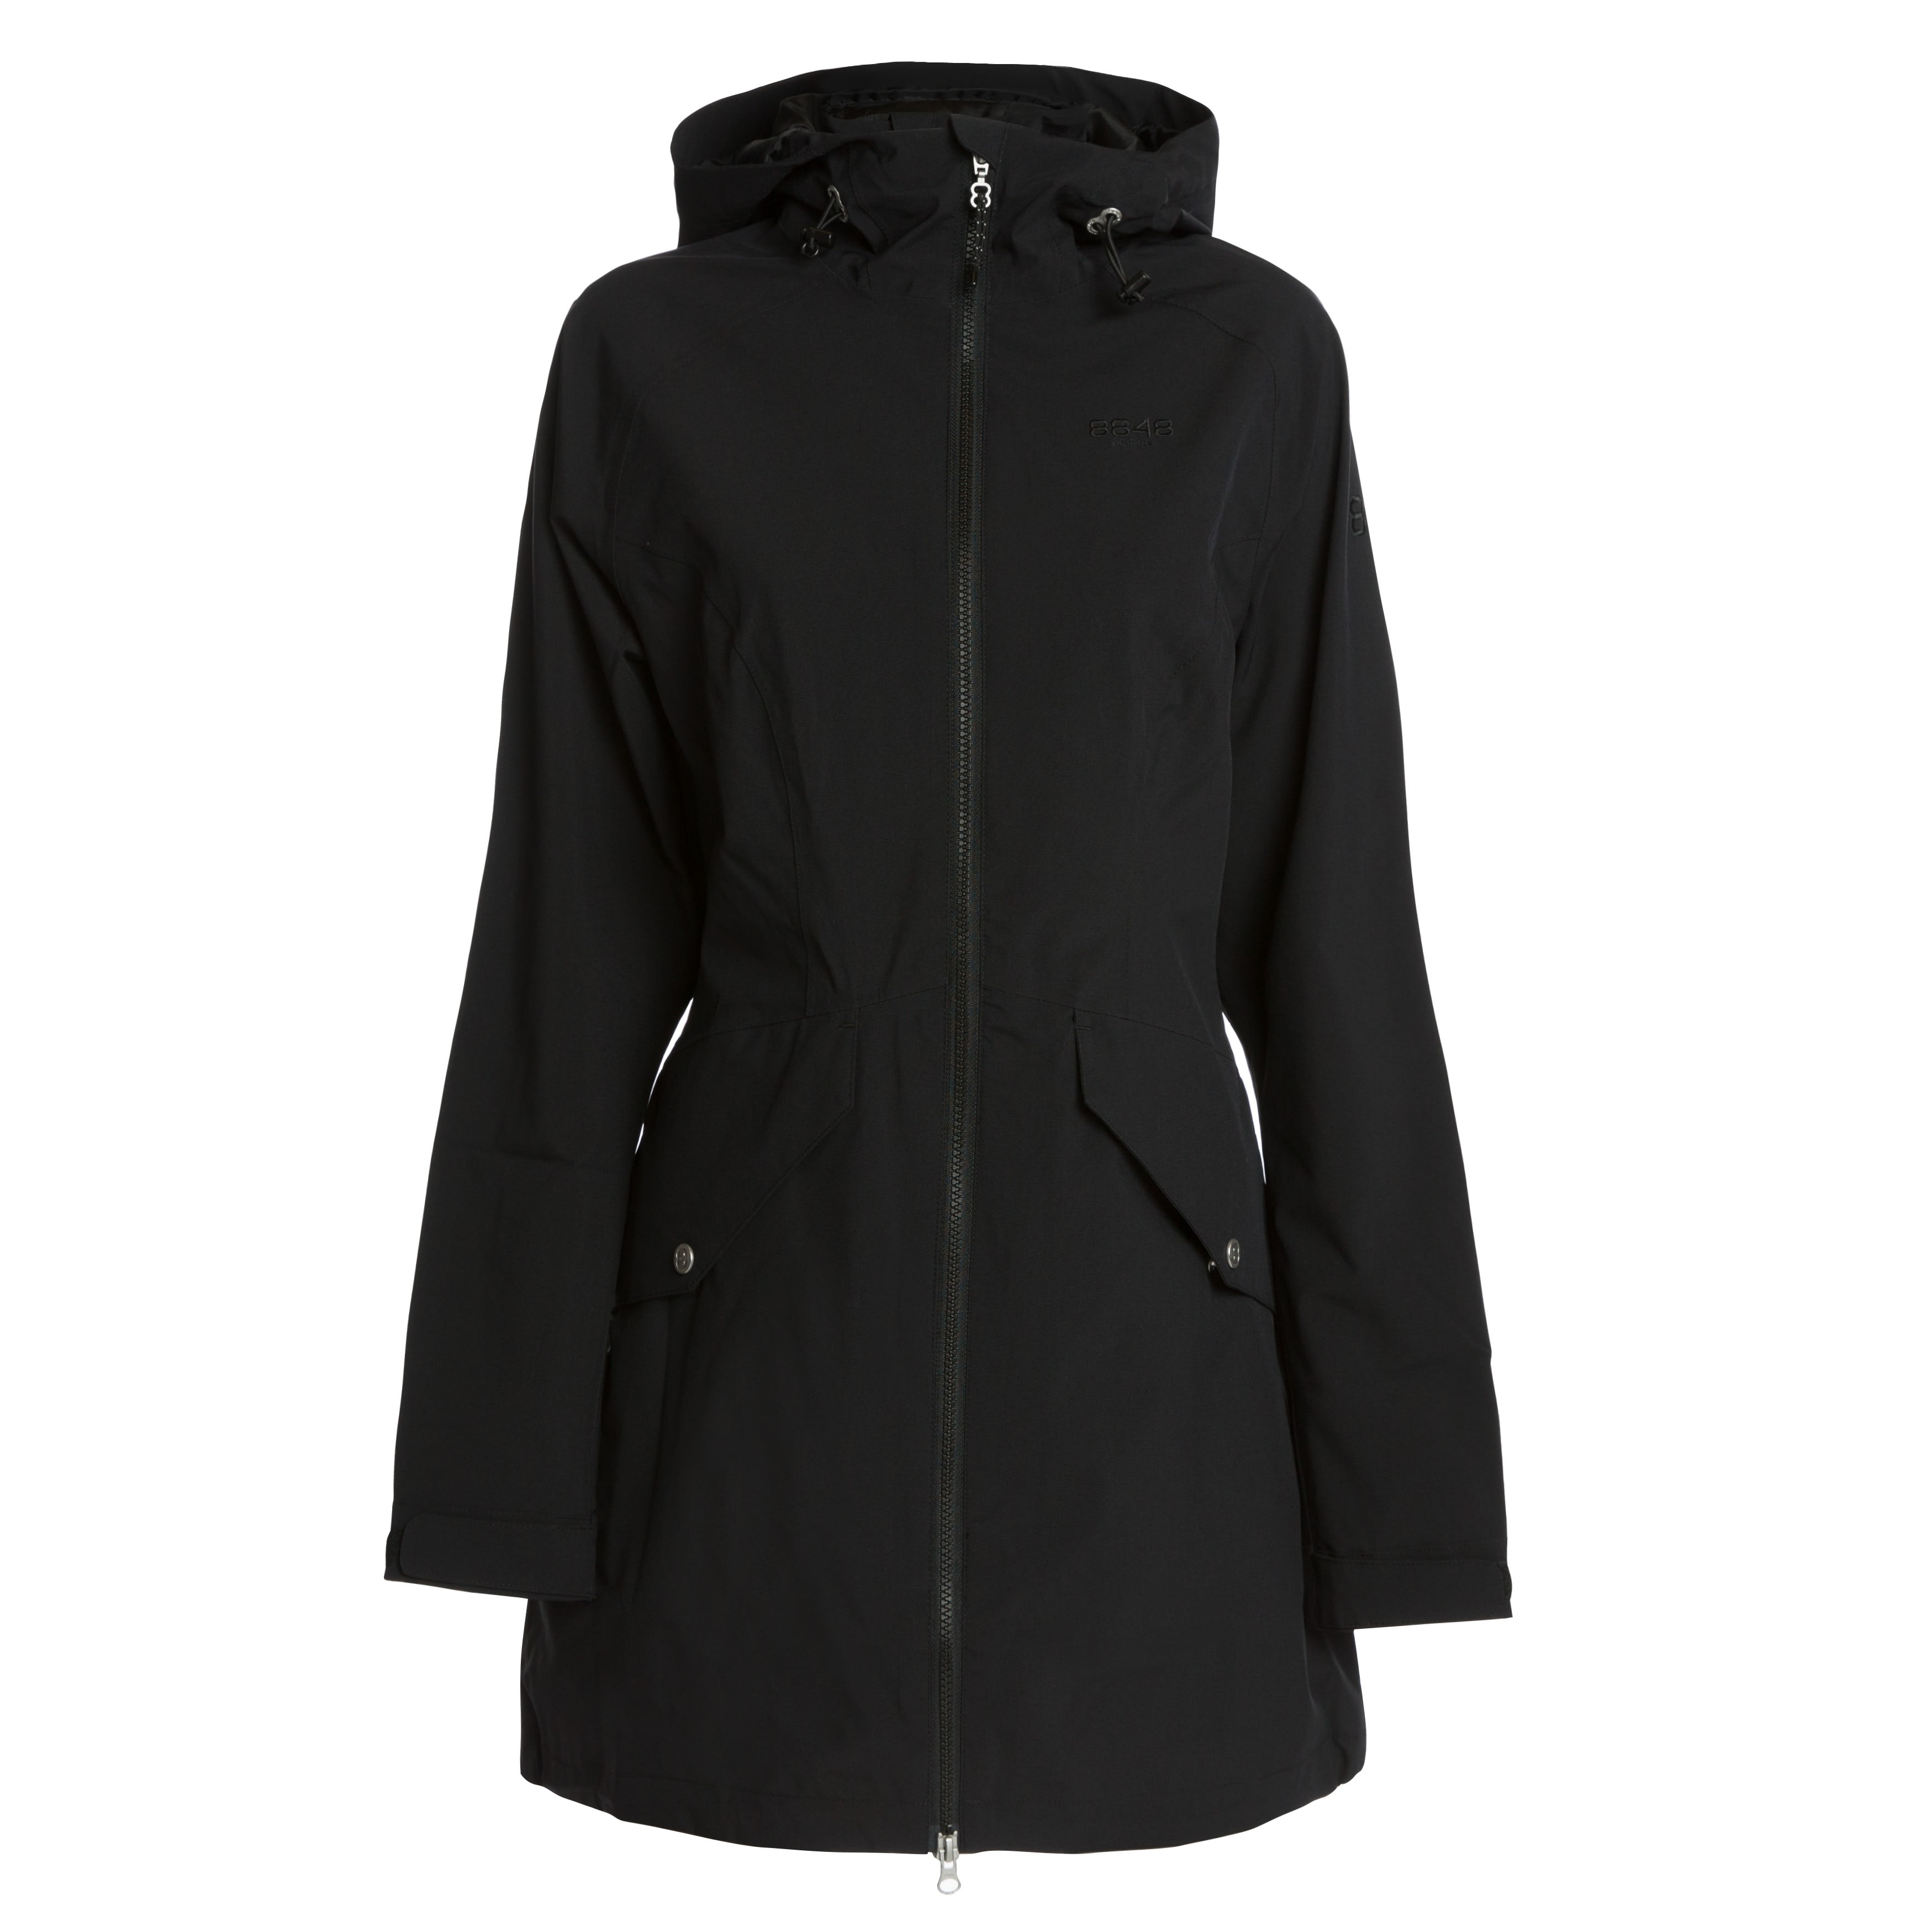 apparat accelerator Sightseeing Buy 8848 Altitude Women's Ayla Jacket from Outnorth